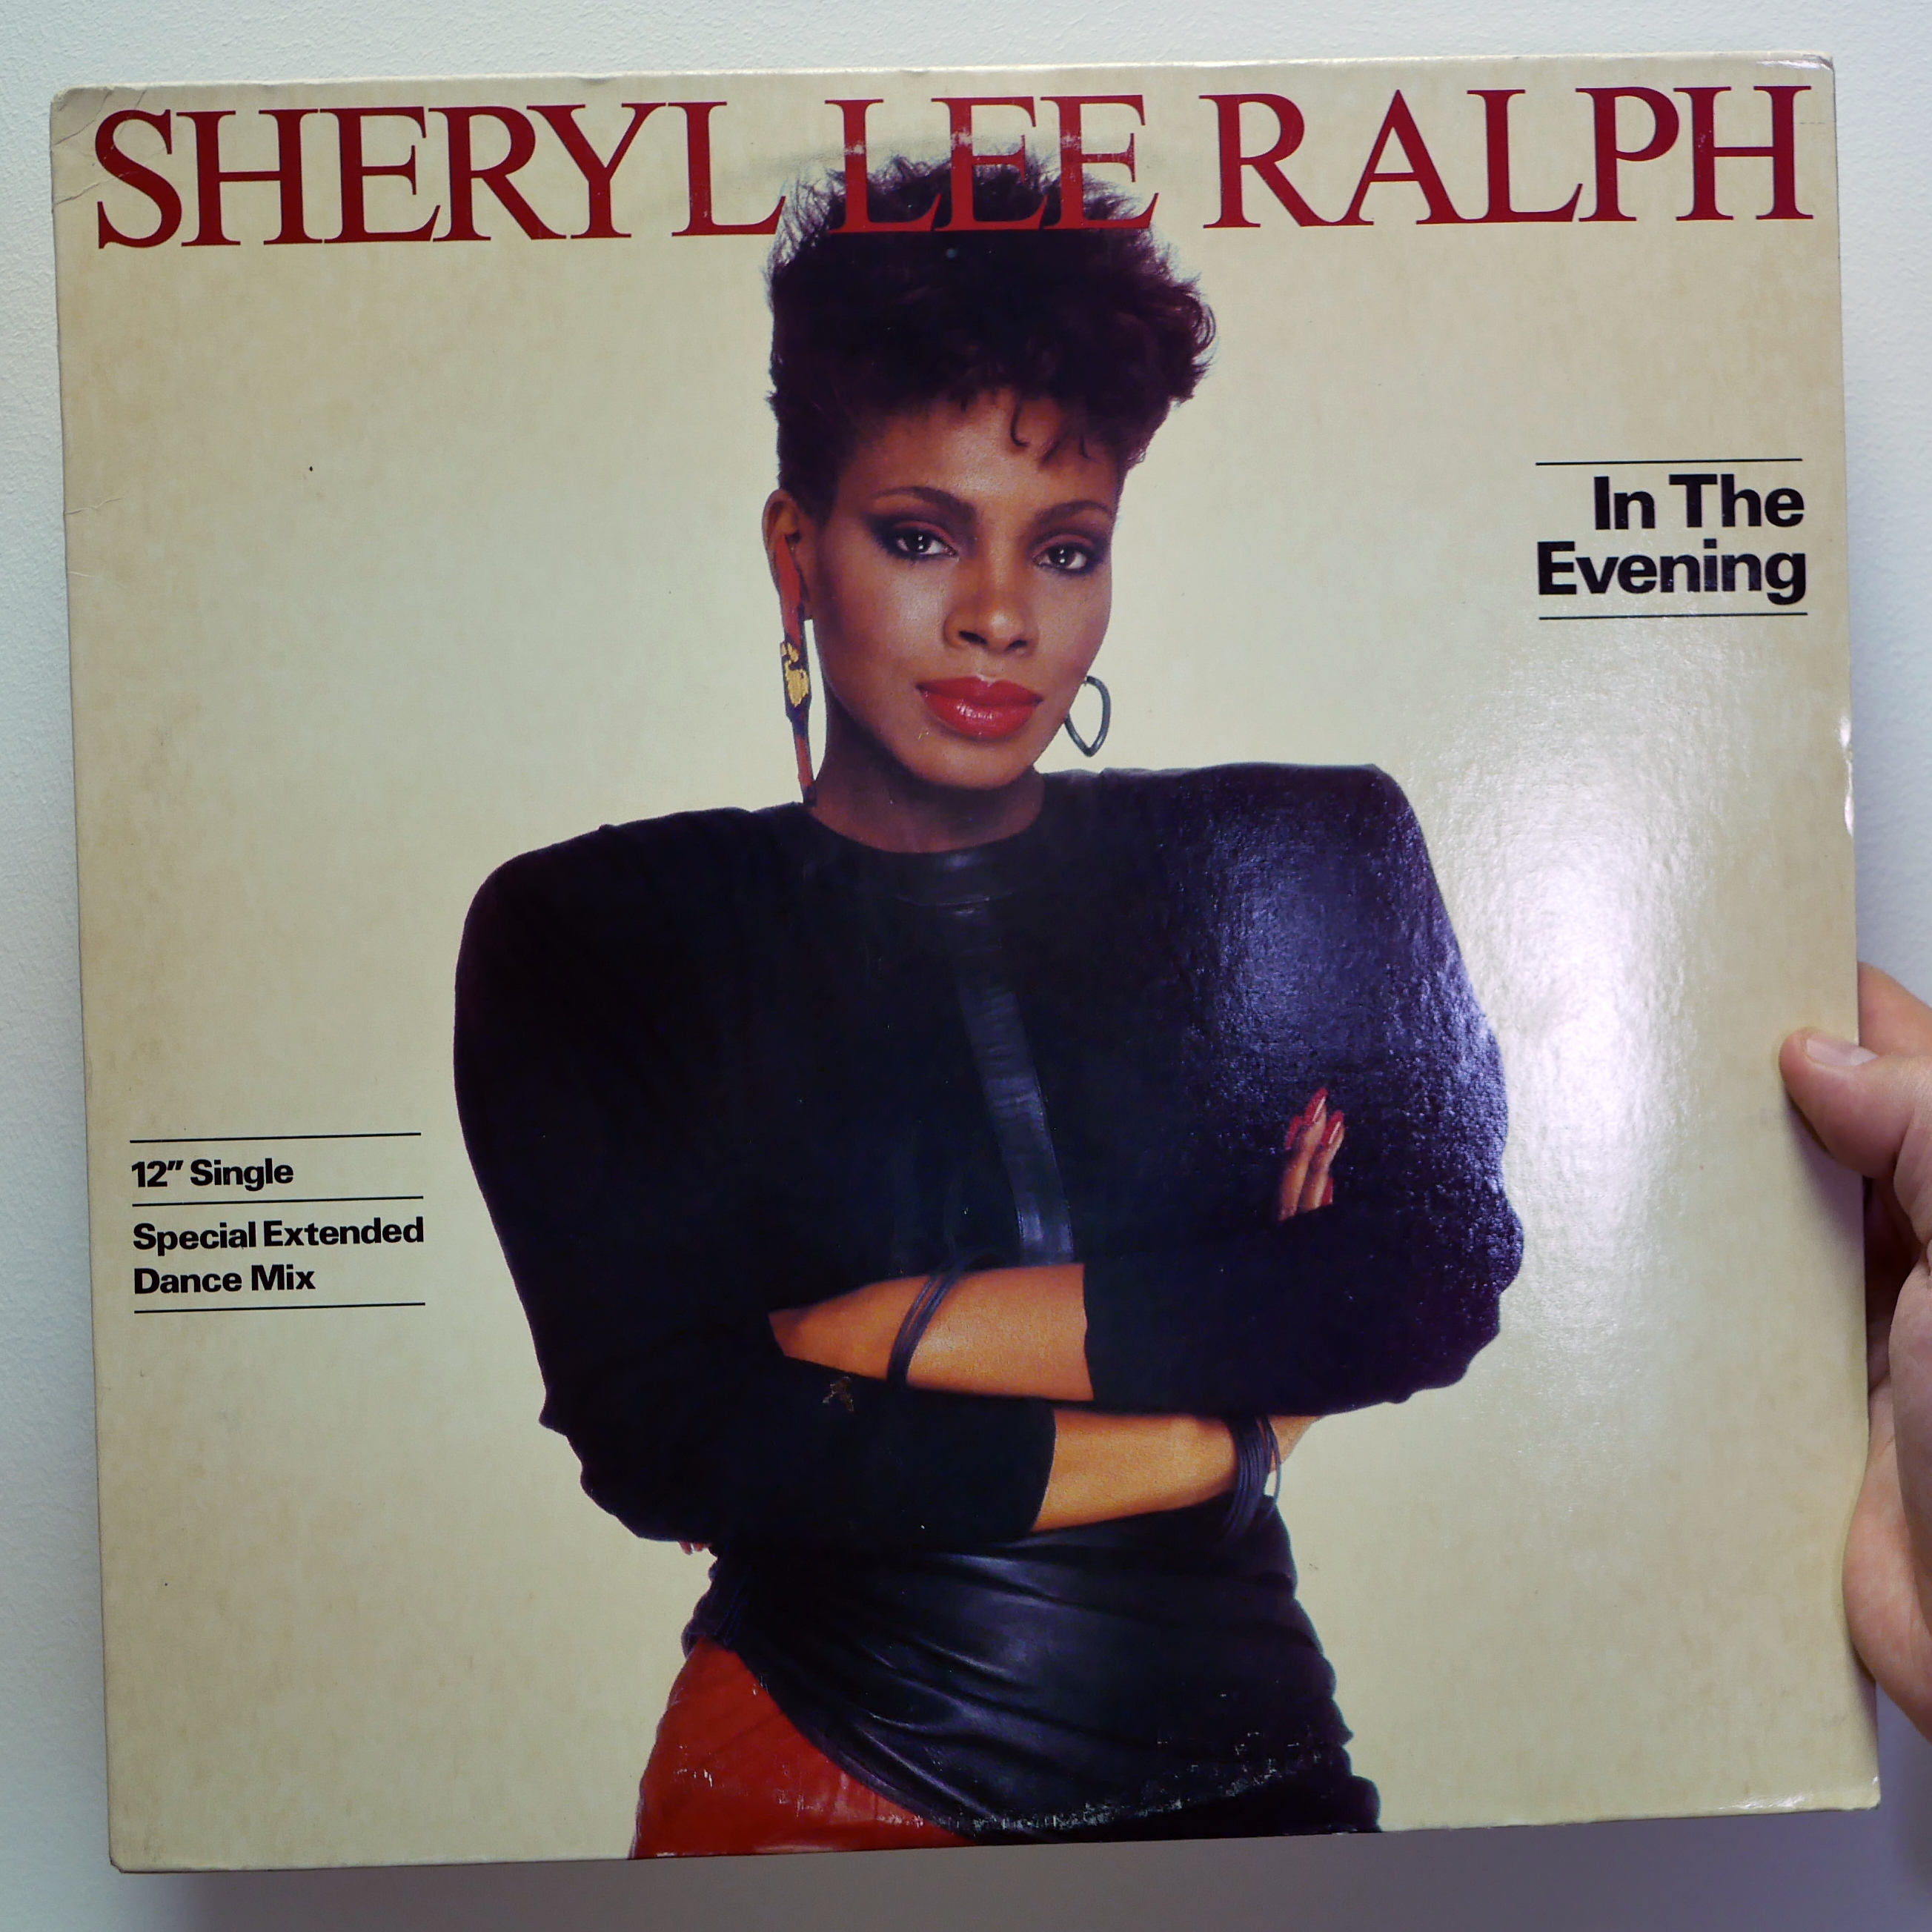 Sheryl Lee Ralph – In the Evening (Special Extended Dance Mix) [12”, 1984]